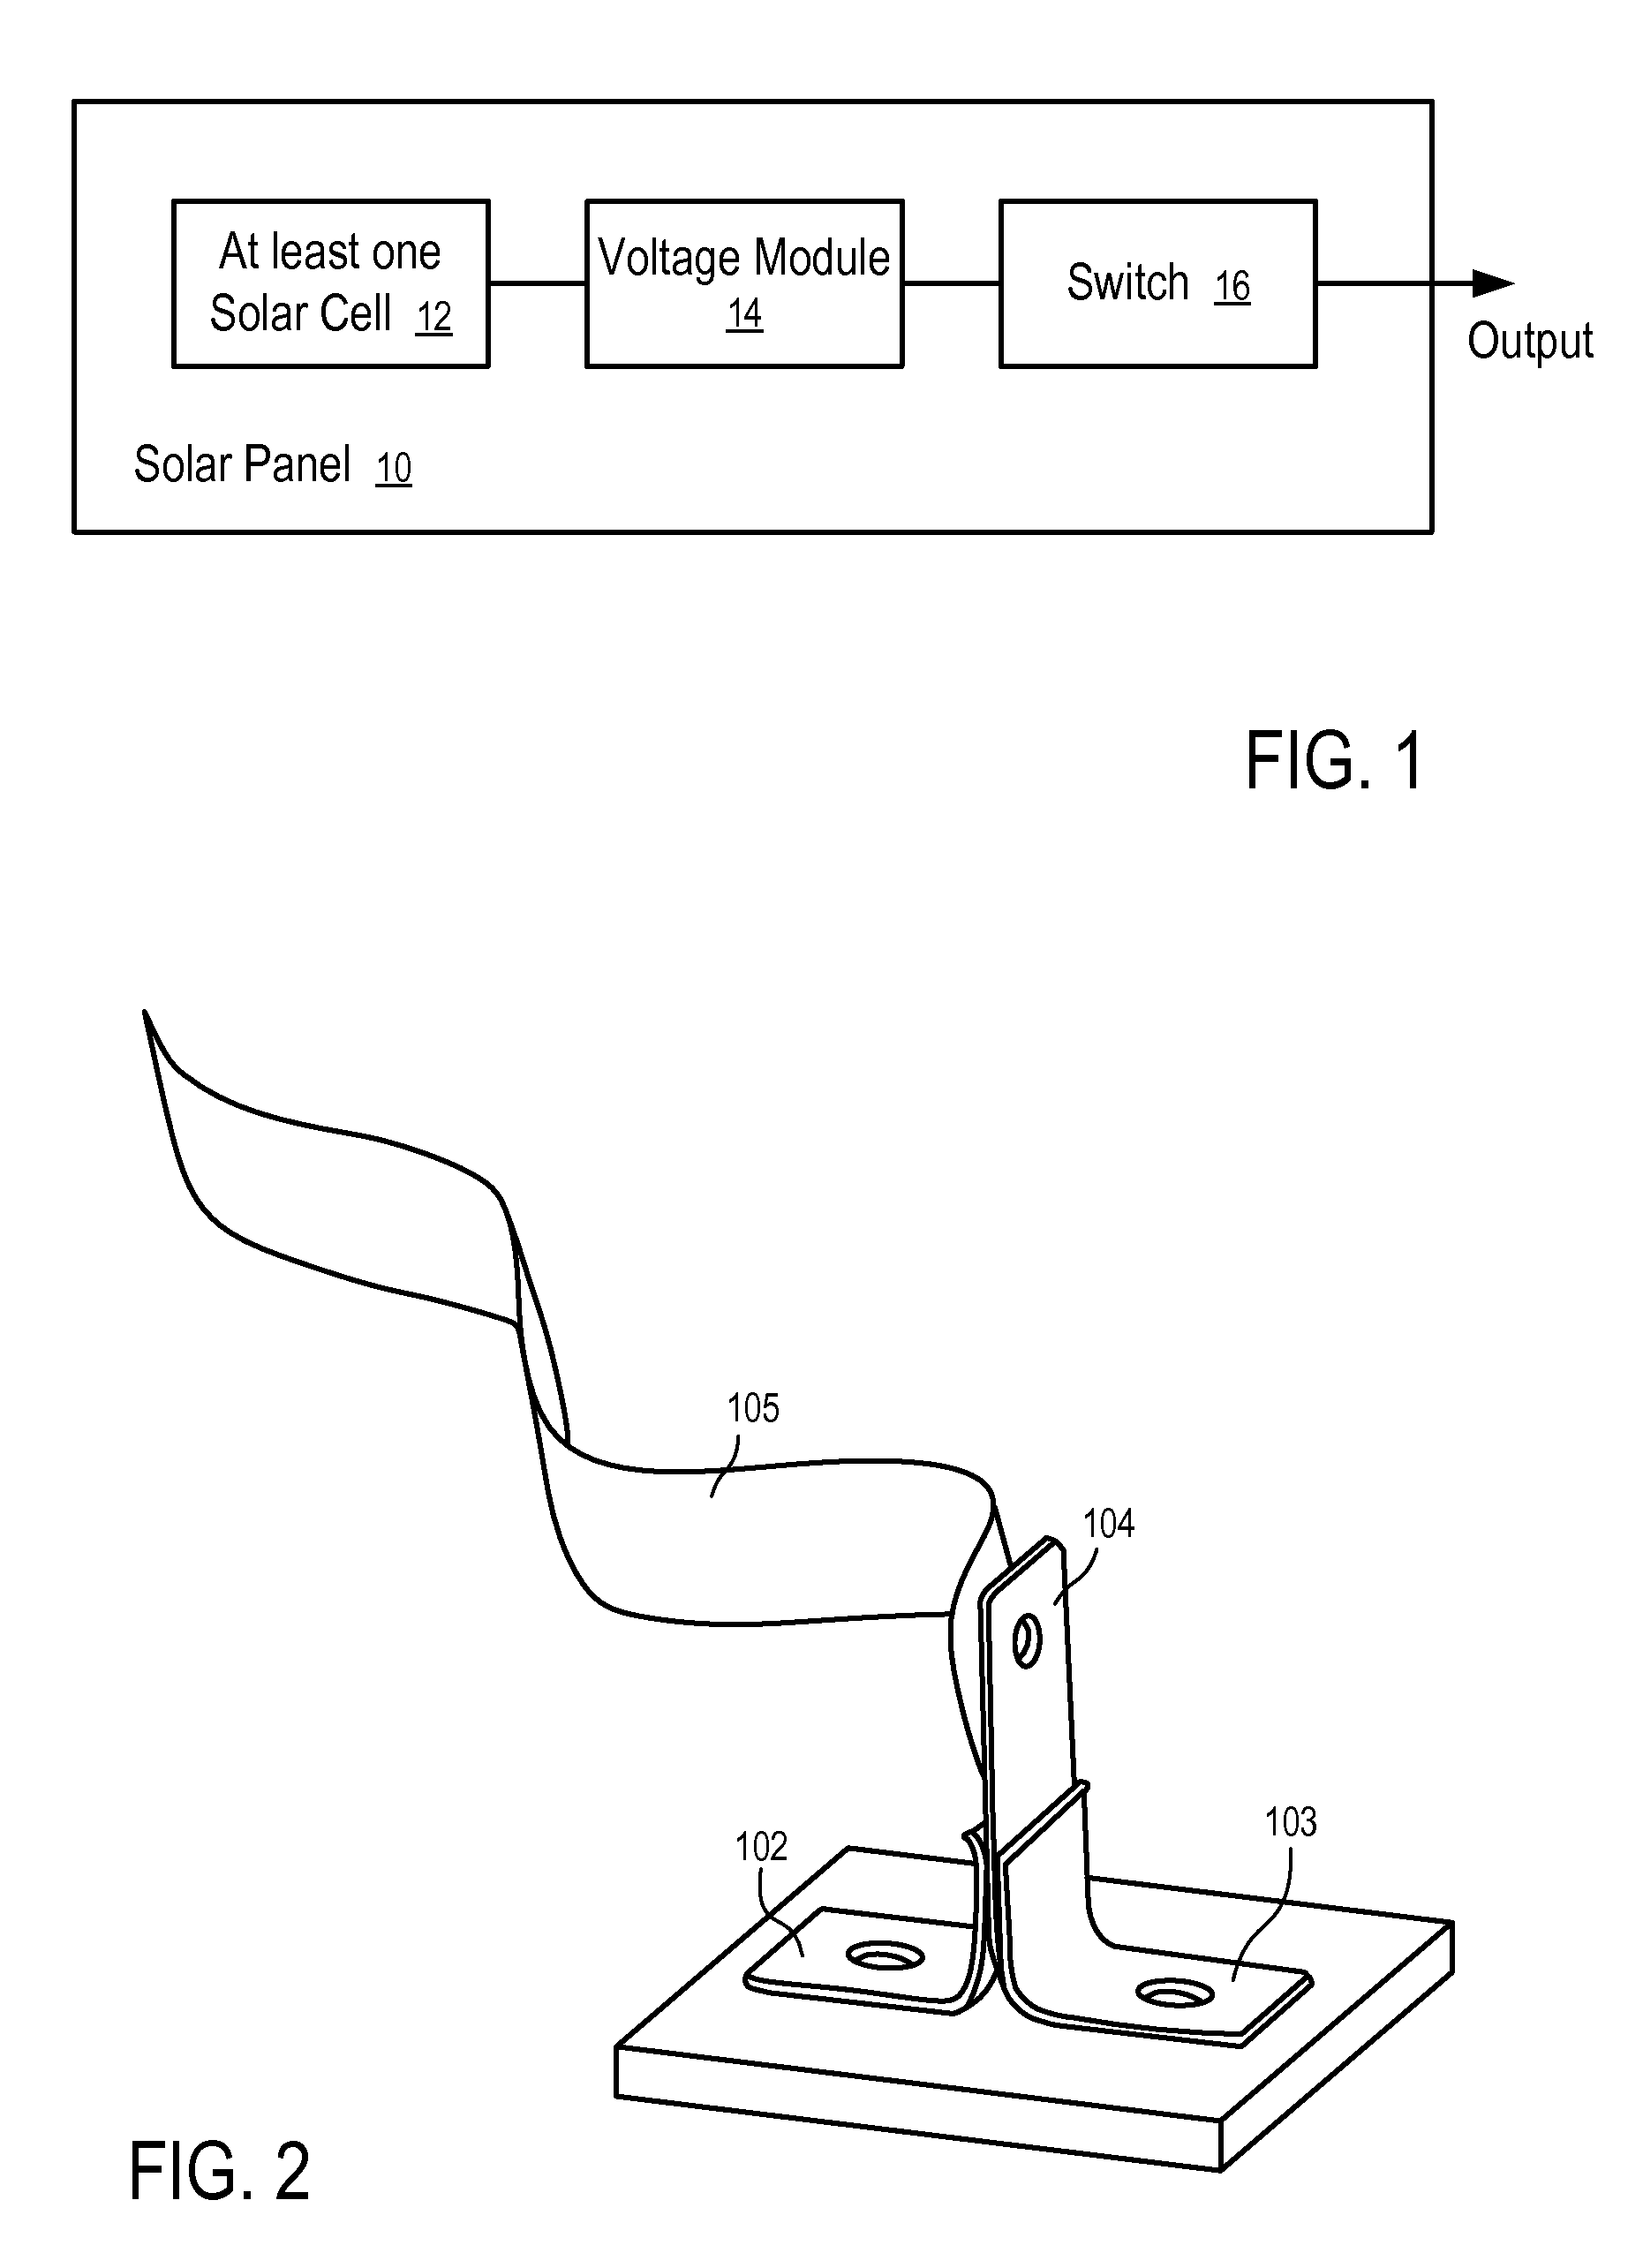 Apparatuses and Methods to Reduce Safety Risks Associated with Photovoltaic Systems